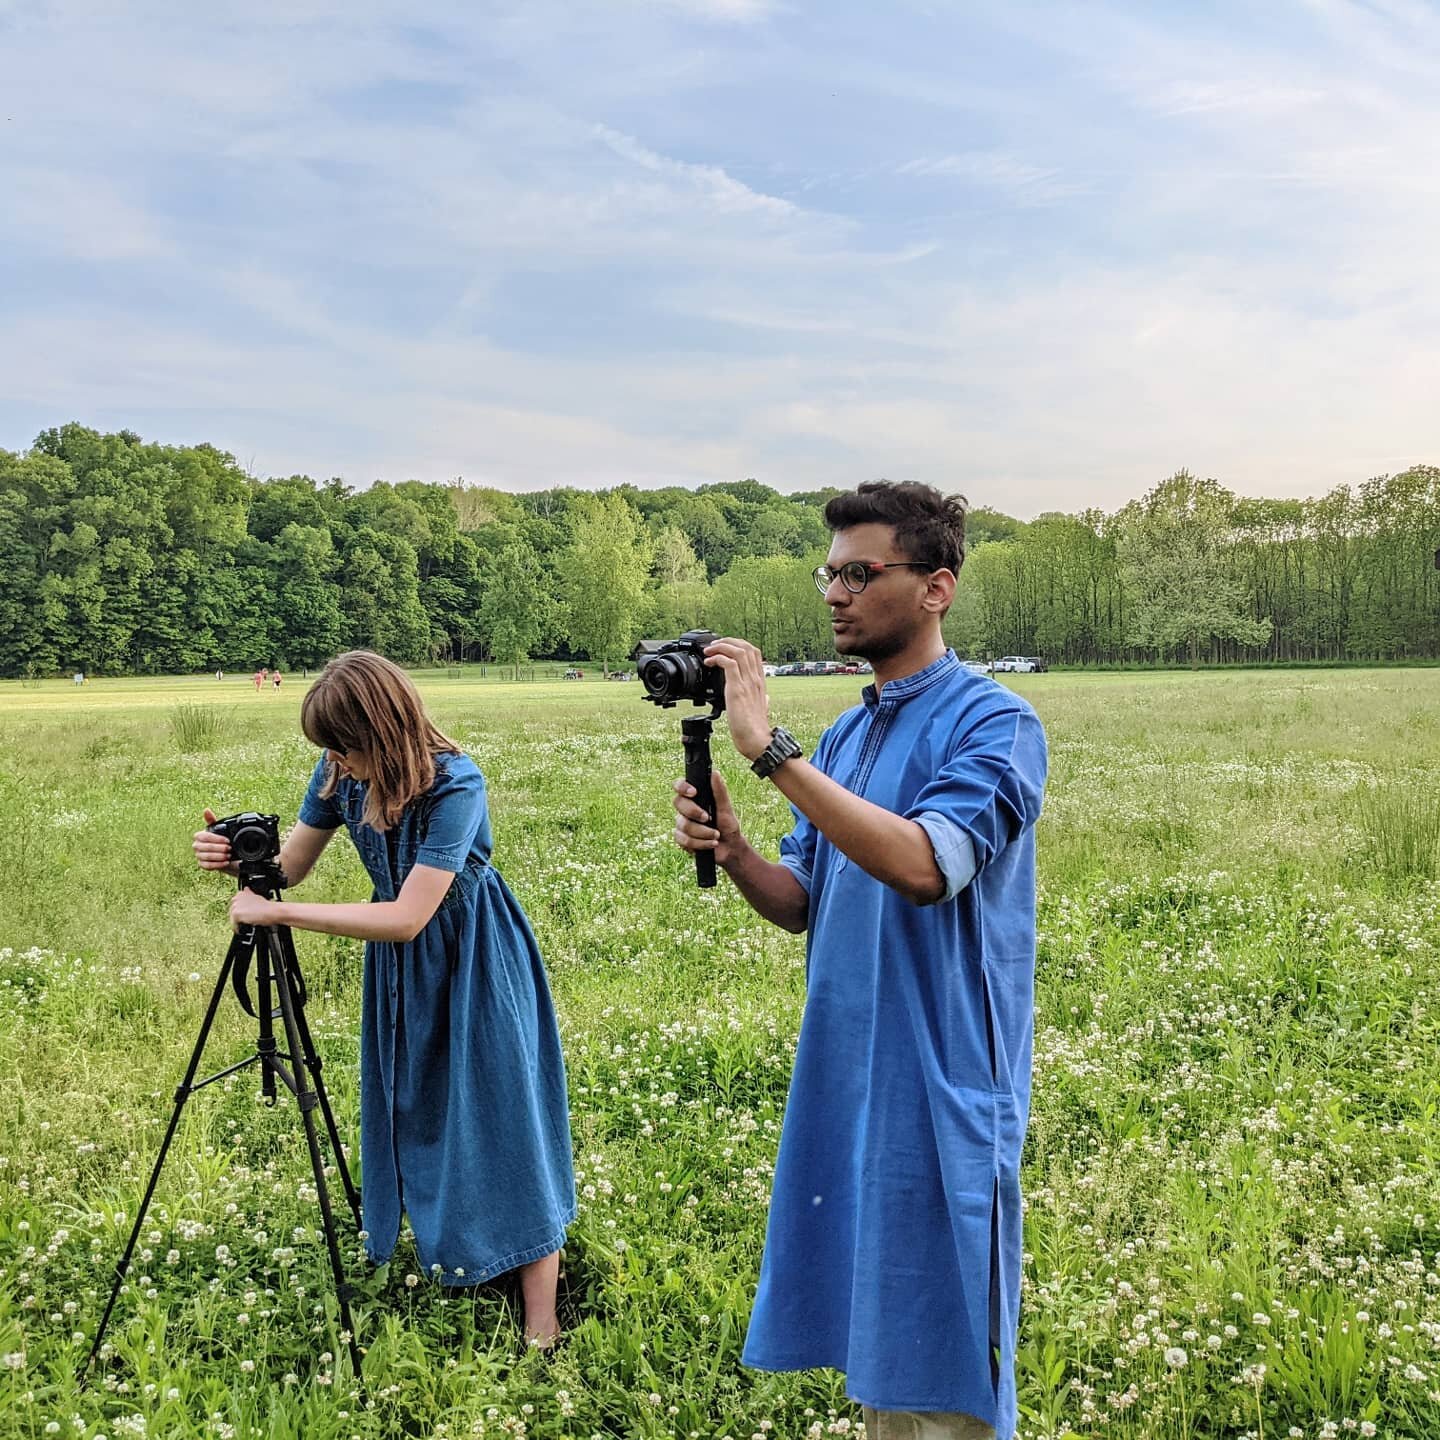 Tomorrow we premier the music video for My Morning at 11:59 AM

Filmed and produced by @notdhruvkulkarni @lizmmusic @sturossjohnson 

Dancing and choreography by @eyytoaster and @pretzel_bao_bae 

#musicvideo #premier #indy #indiana #cameras #dslr #l